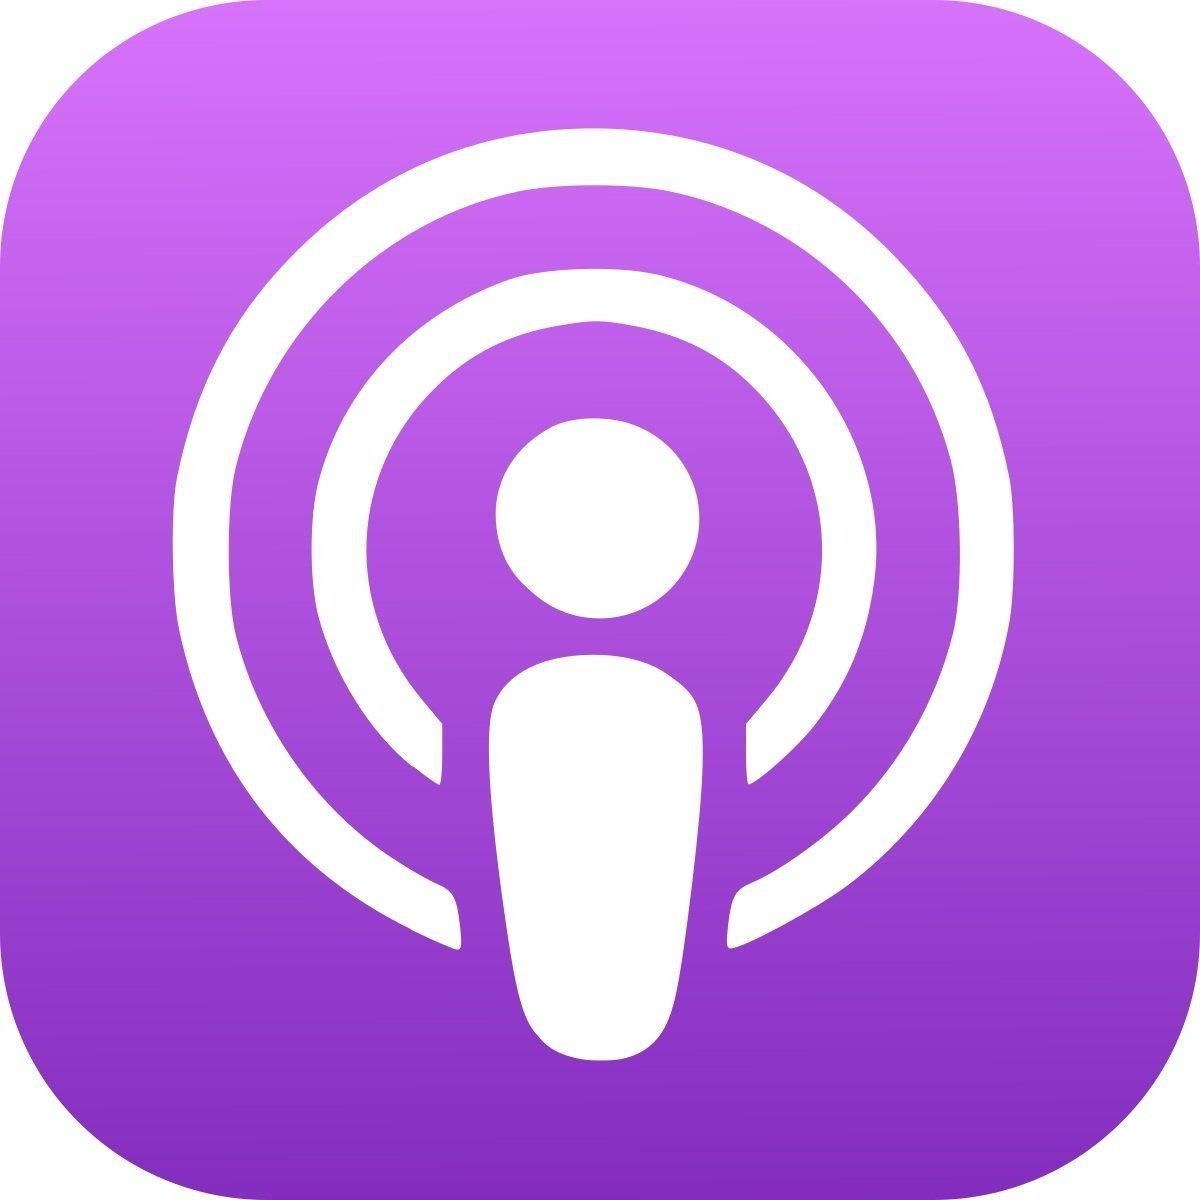  https://podcasts.apple.com/ca/podcast/5-reasons-your-pitches-are-getting-rejected-and-what/id1545153597?i=1000643651826 